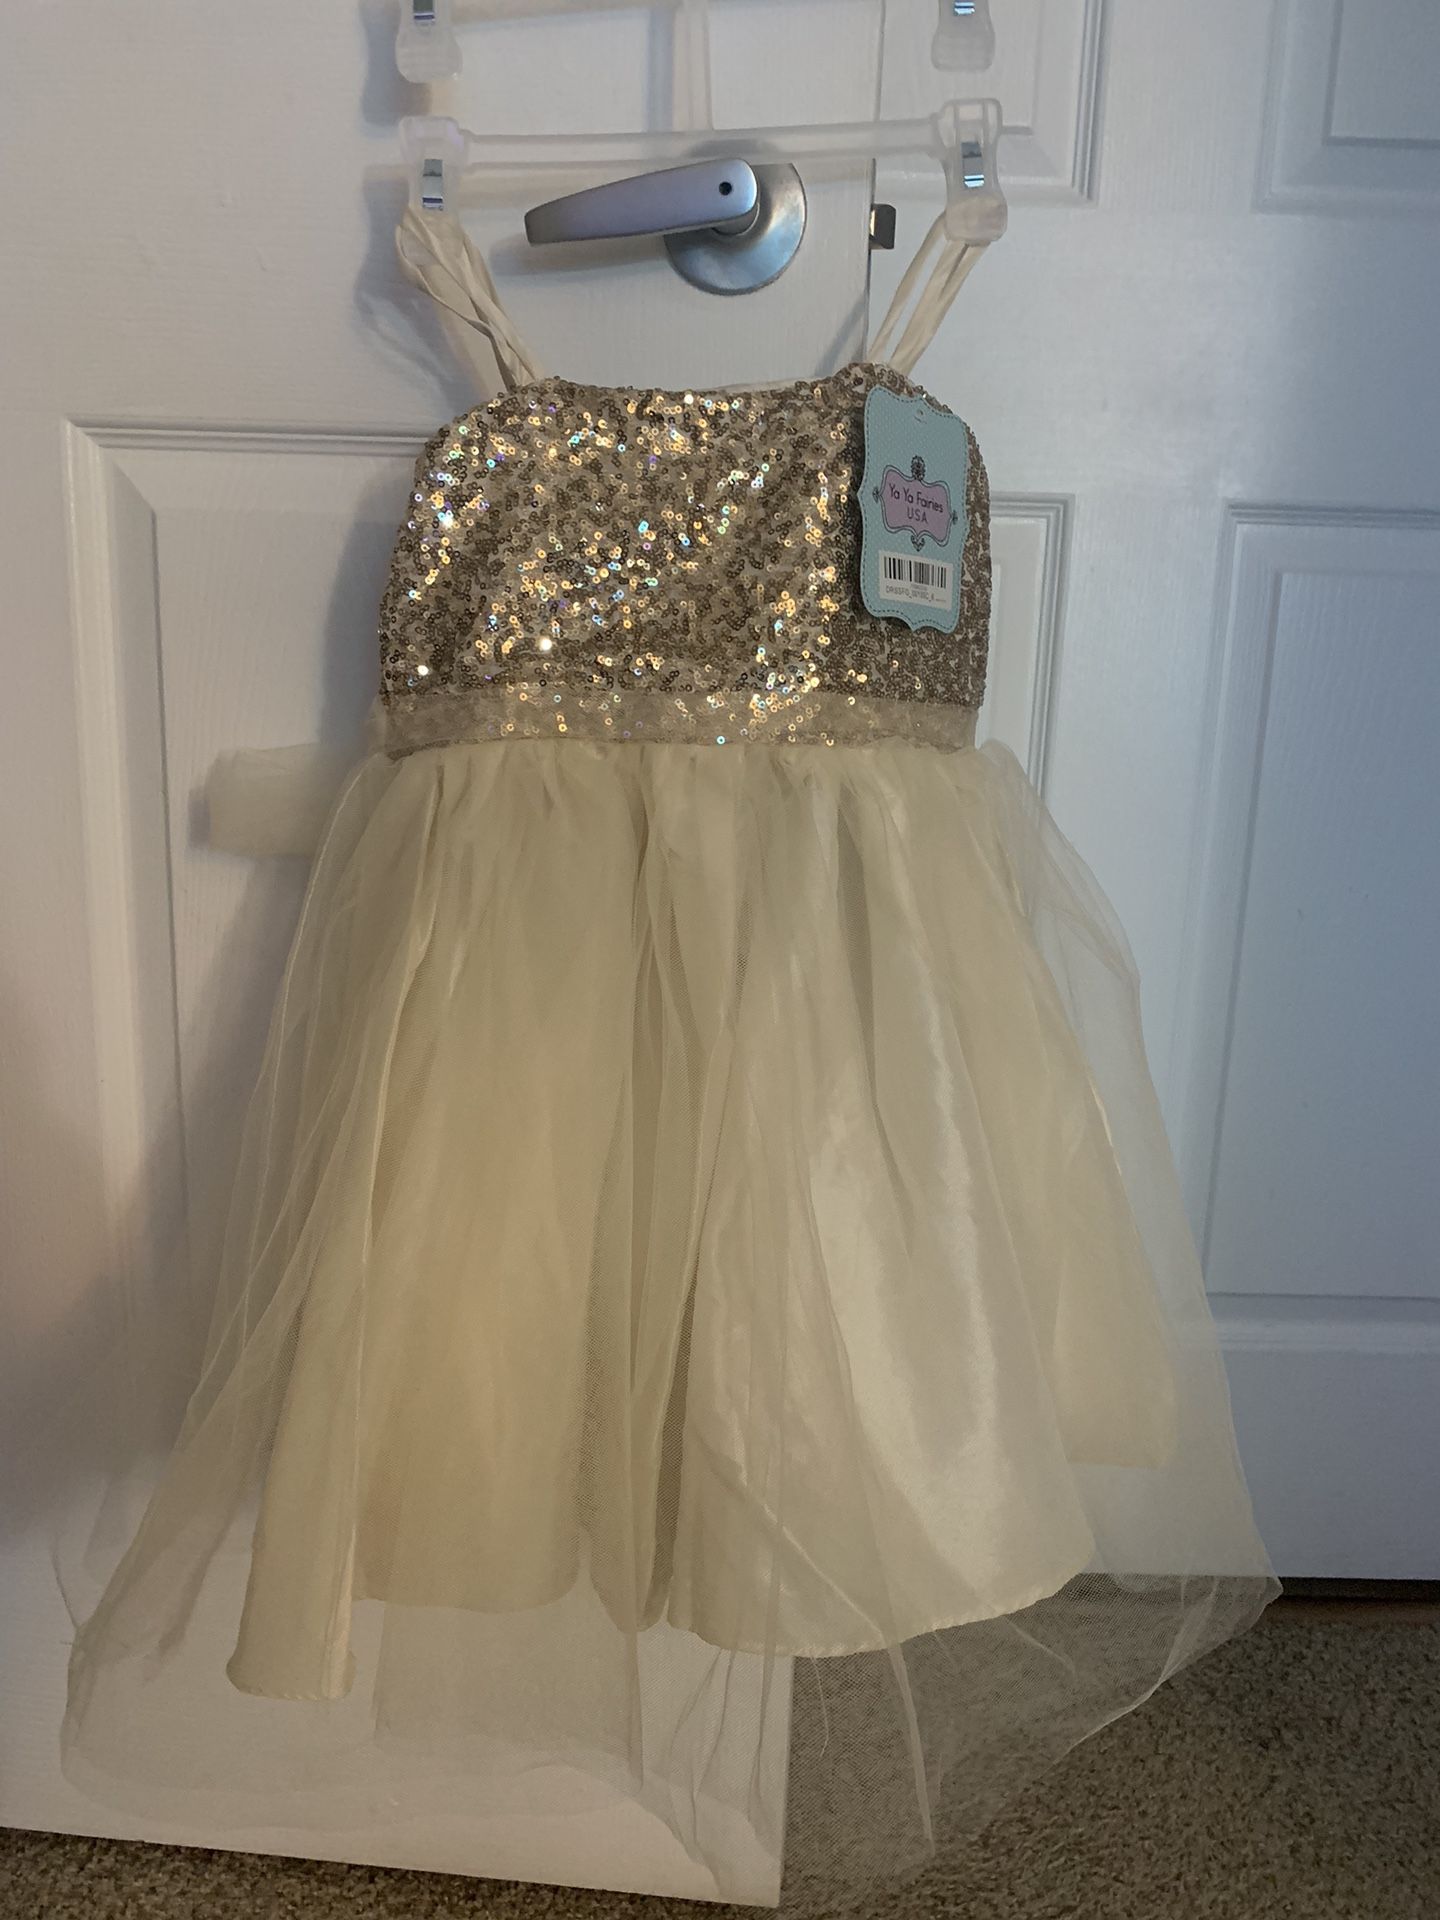 Holliday Gold Sequins Girl Tutu Party Dress Size 6 CHRISTMAS DRESSES 